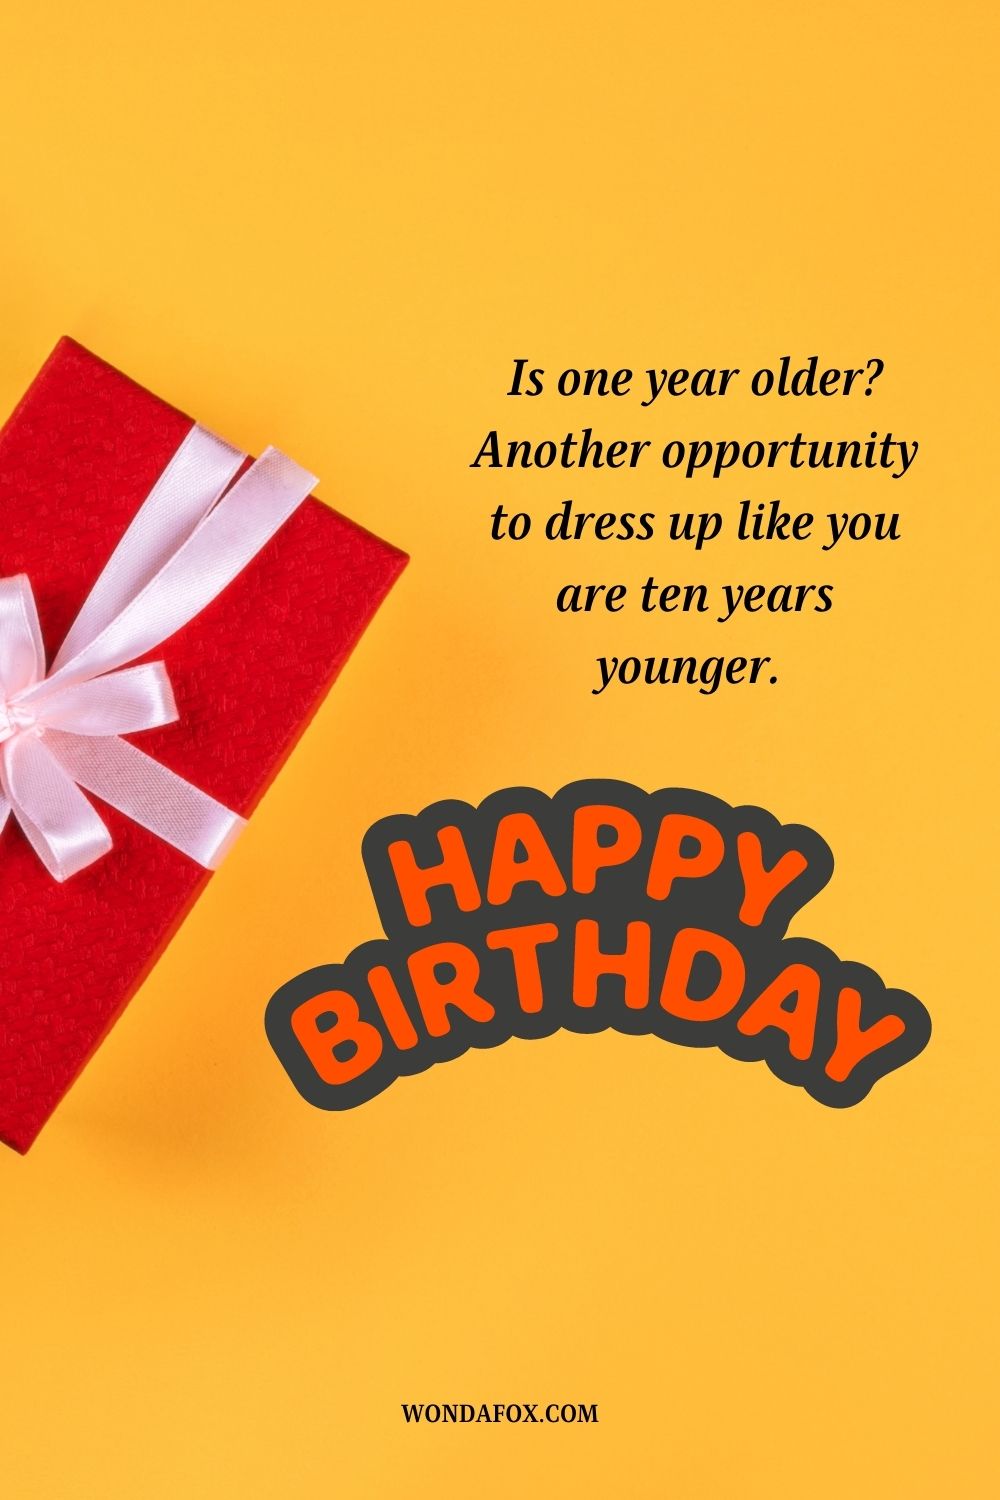 Is one year older? Another opportunity to dress up like you are ten years younger. Happy Birthday!